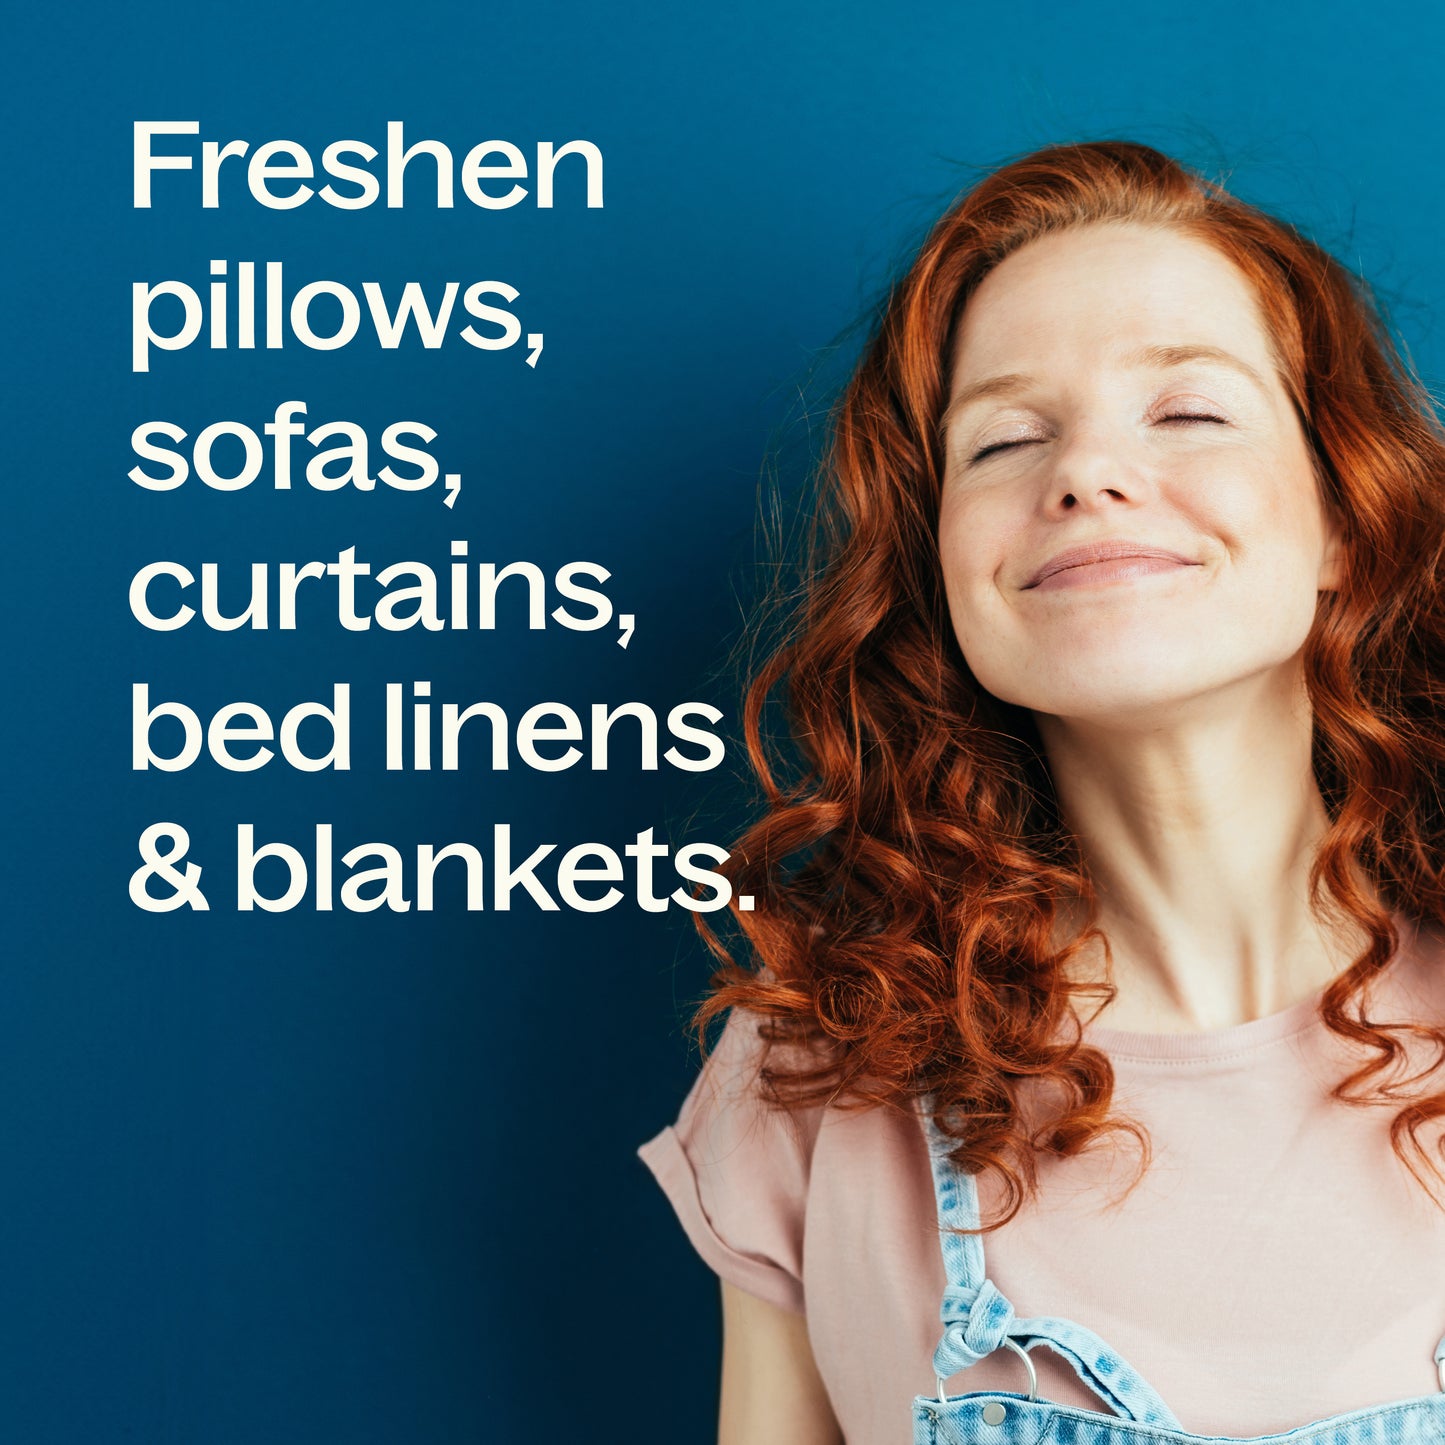 freshen pillows, sofas, curtains bed linens & blankets